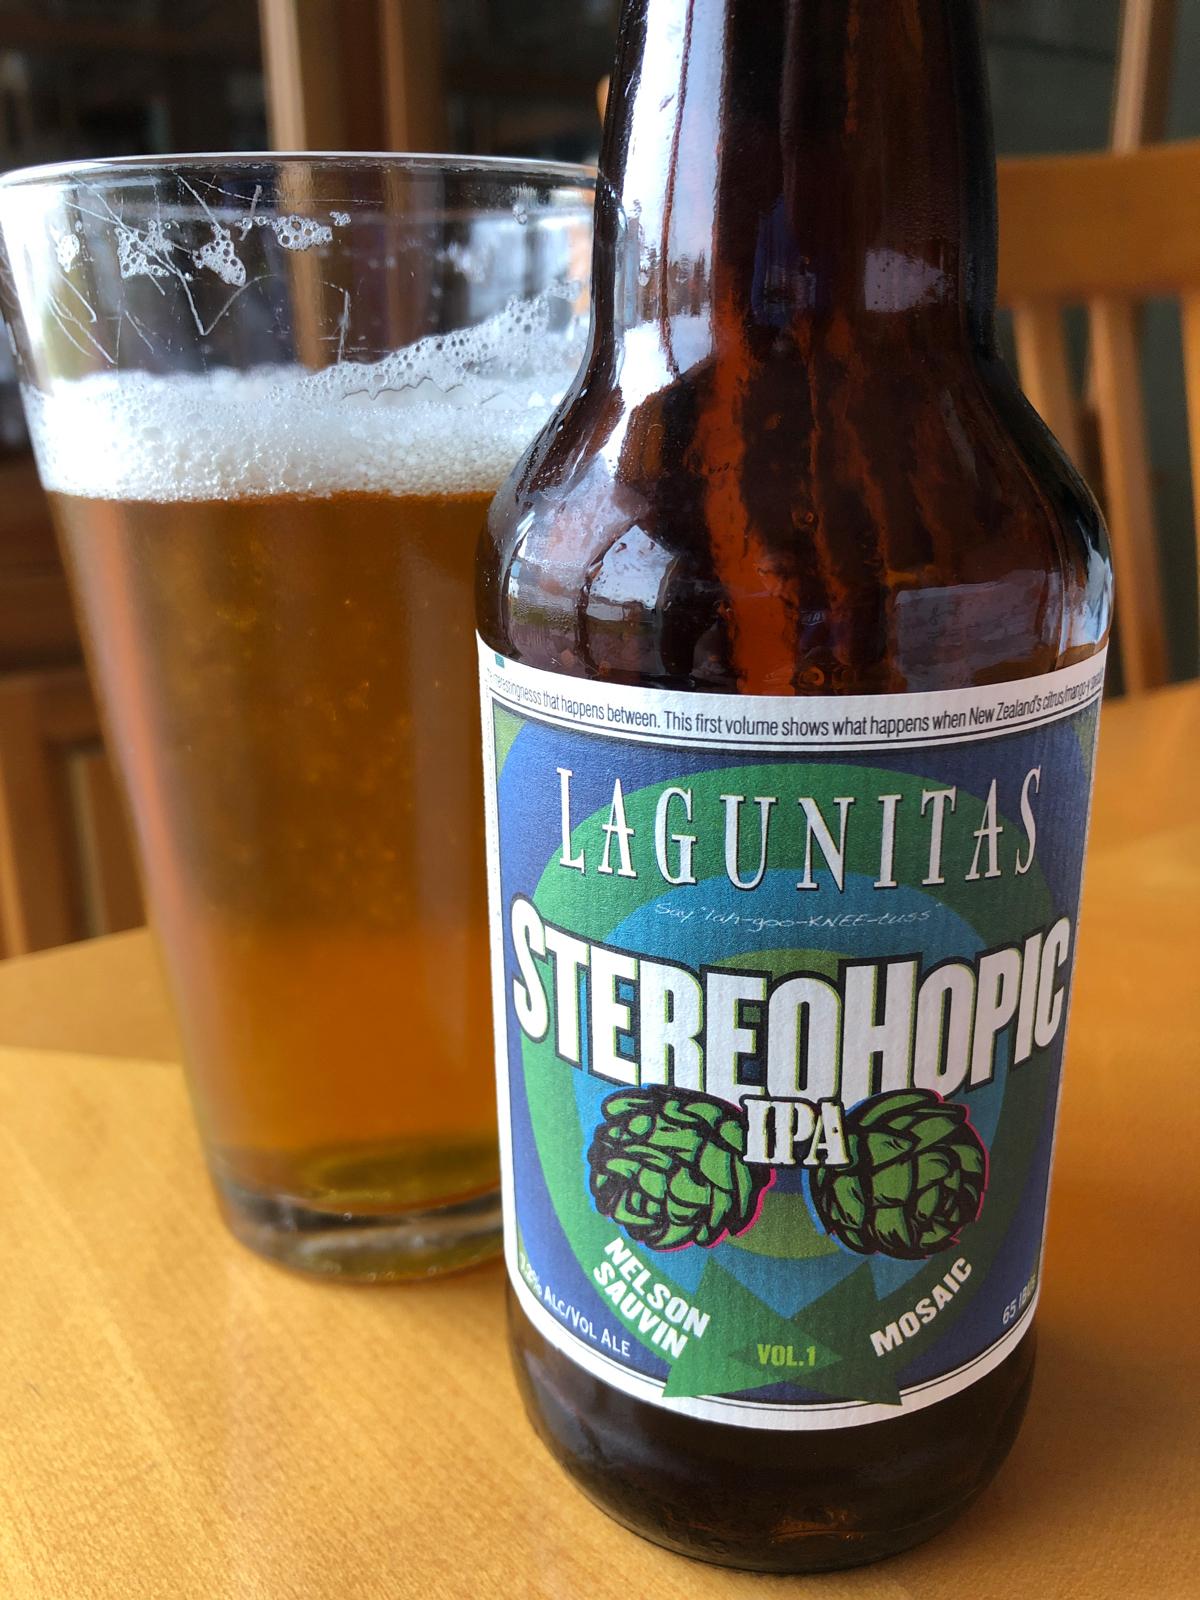 StereoHopic IPA Vol. 1 - Nelson Sauvin & Mosaic